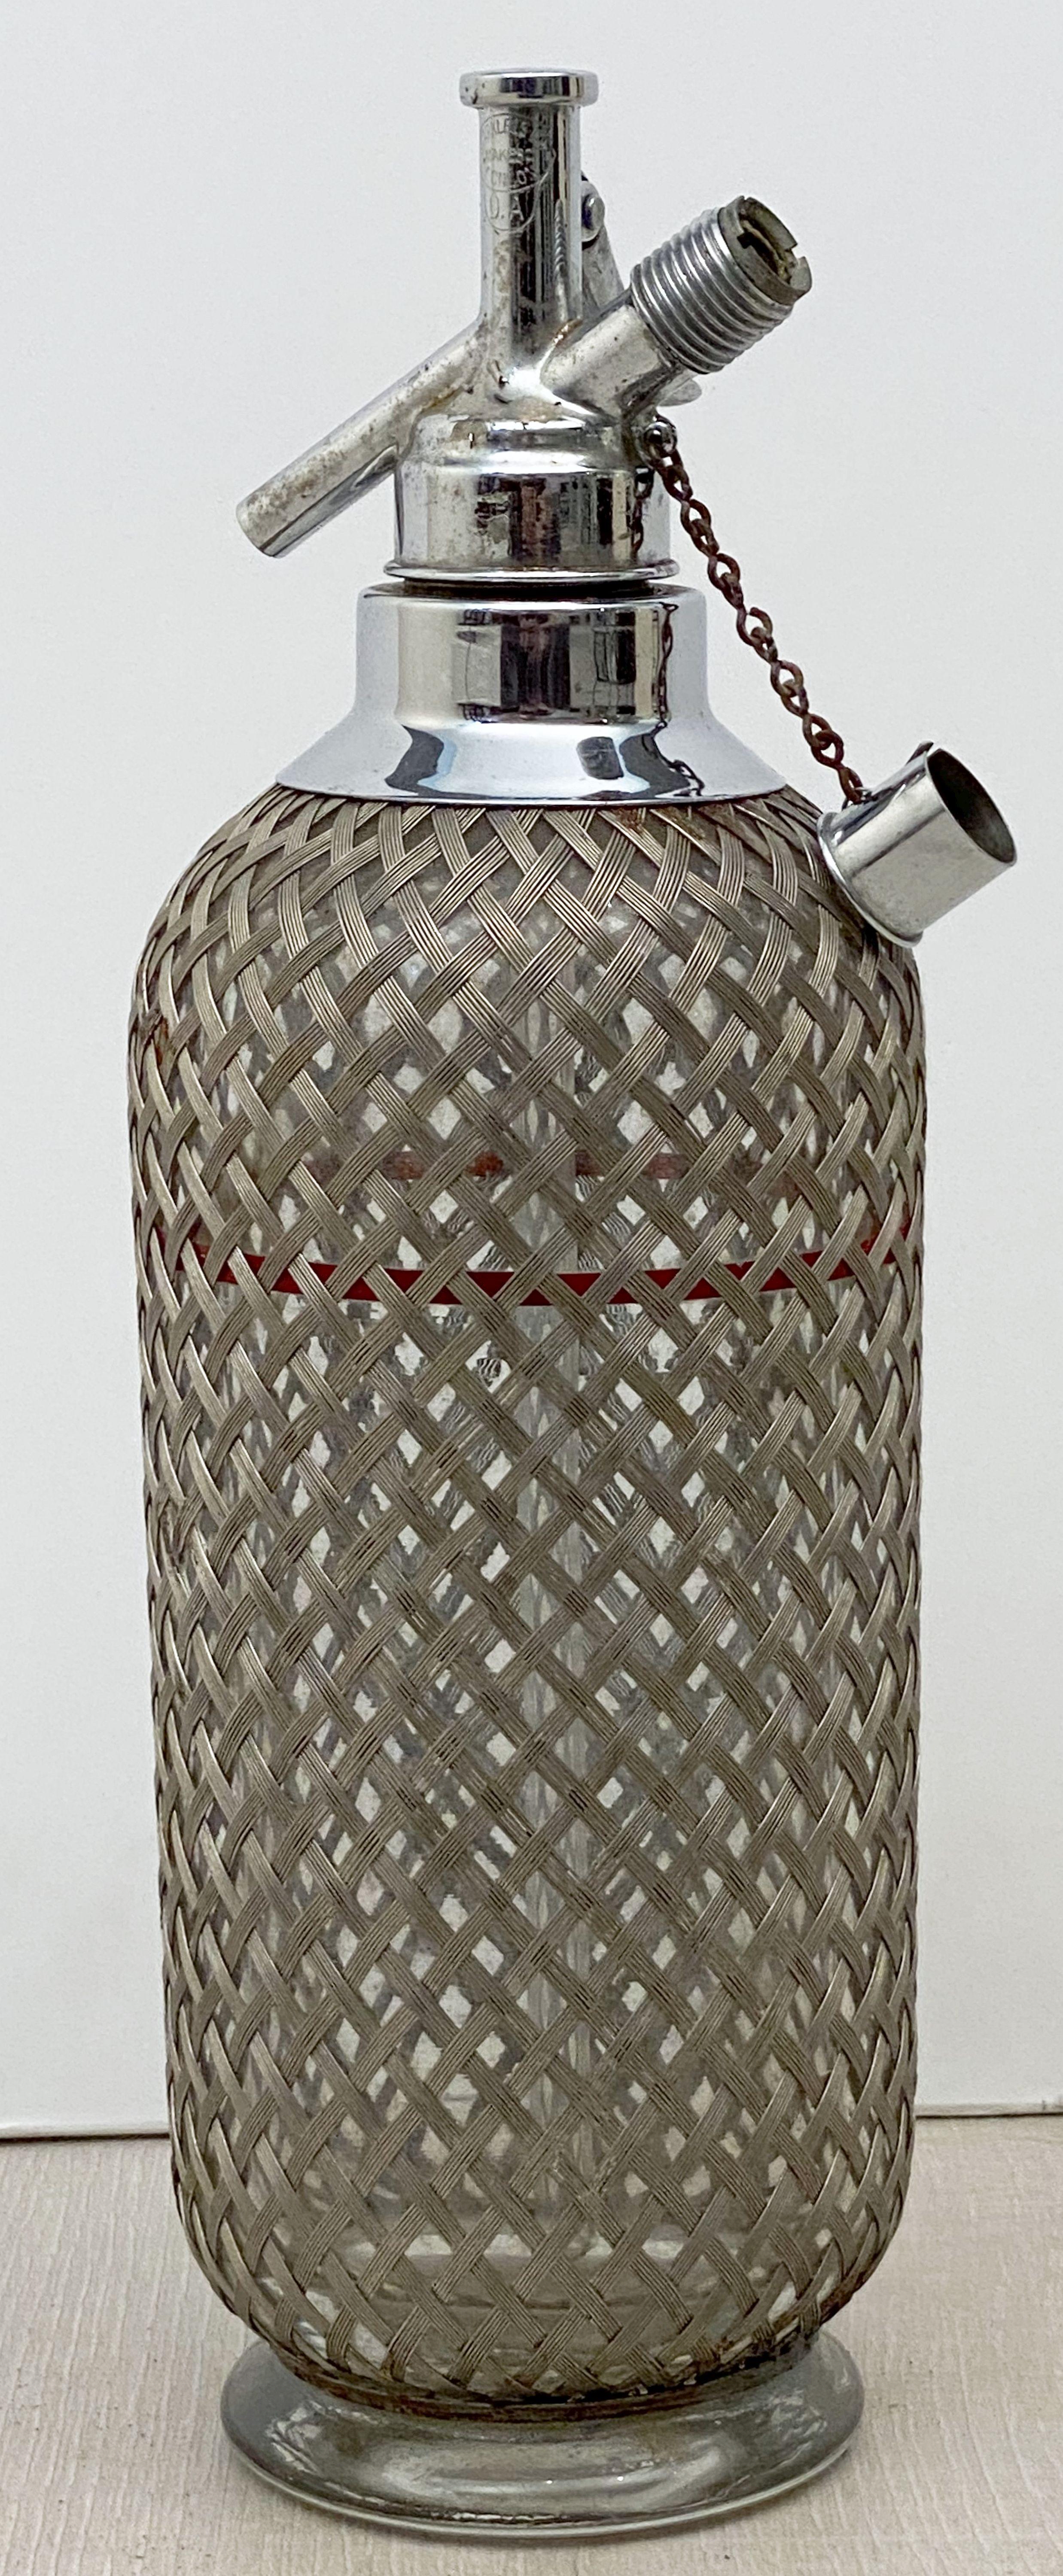 A fine English soda siphon (or syphon) from the Art Deco Era by the celebrated Sparklets of London, featuring a wire mesh over glass.

The first Sparklets syphon was made in 1896. As it contained water ‘gassed’ by the Sparklet bulb, it was covered